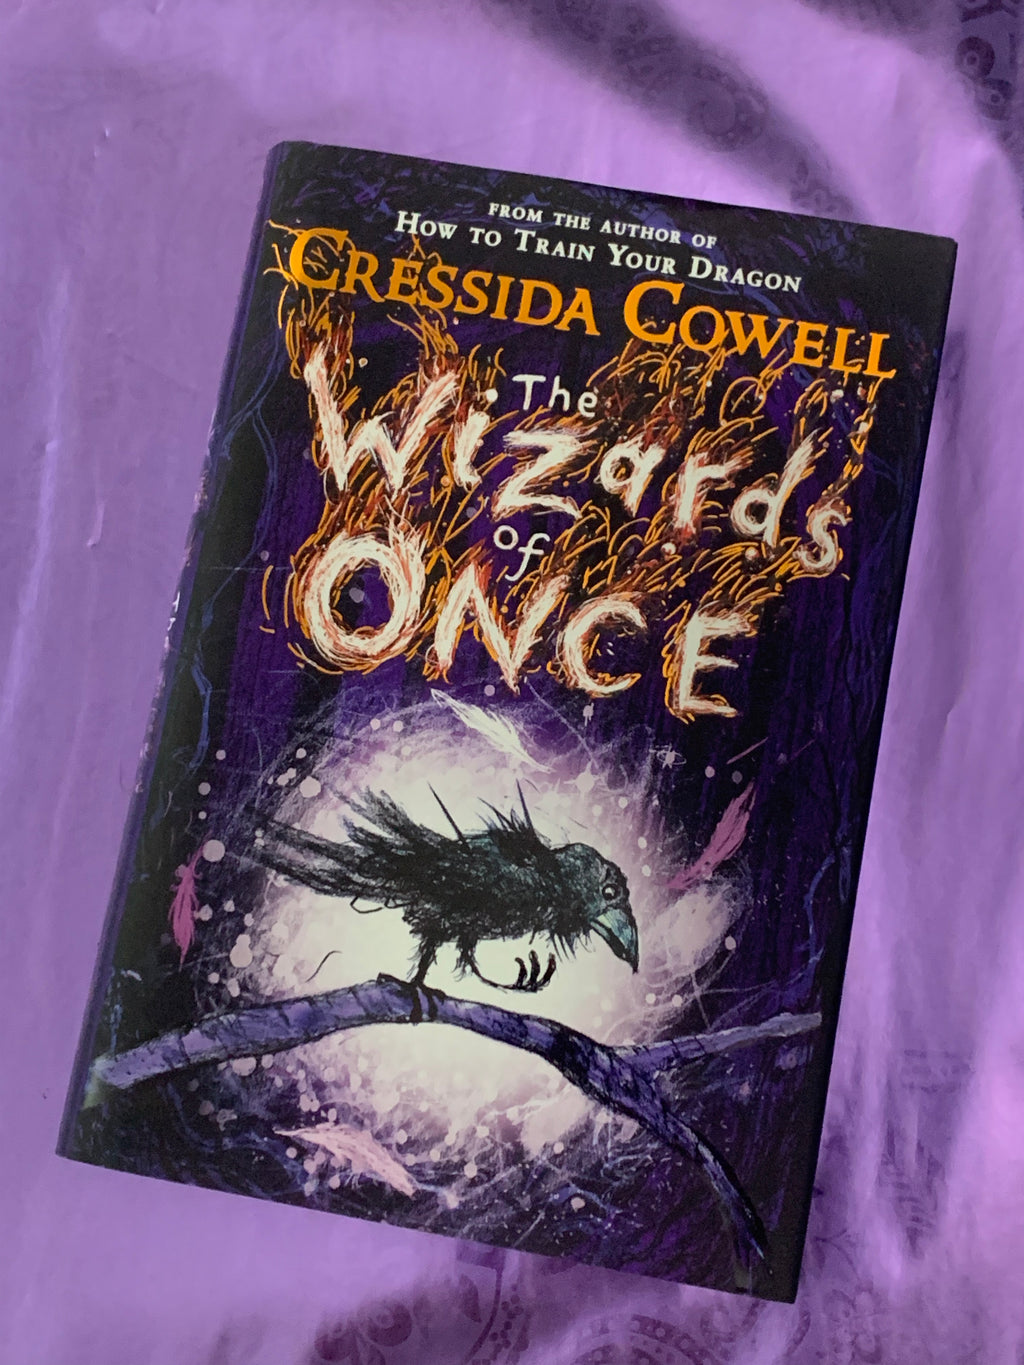 The Wizards of Once- By Cressida Cowell